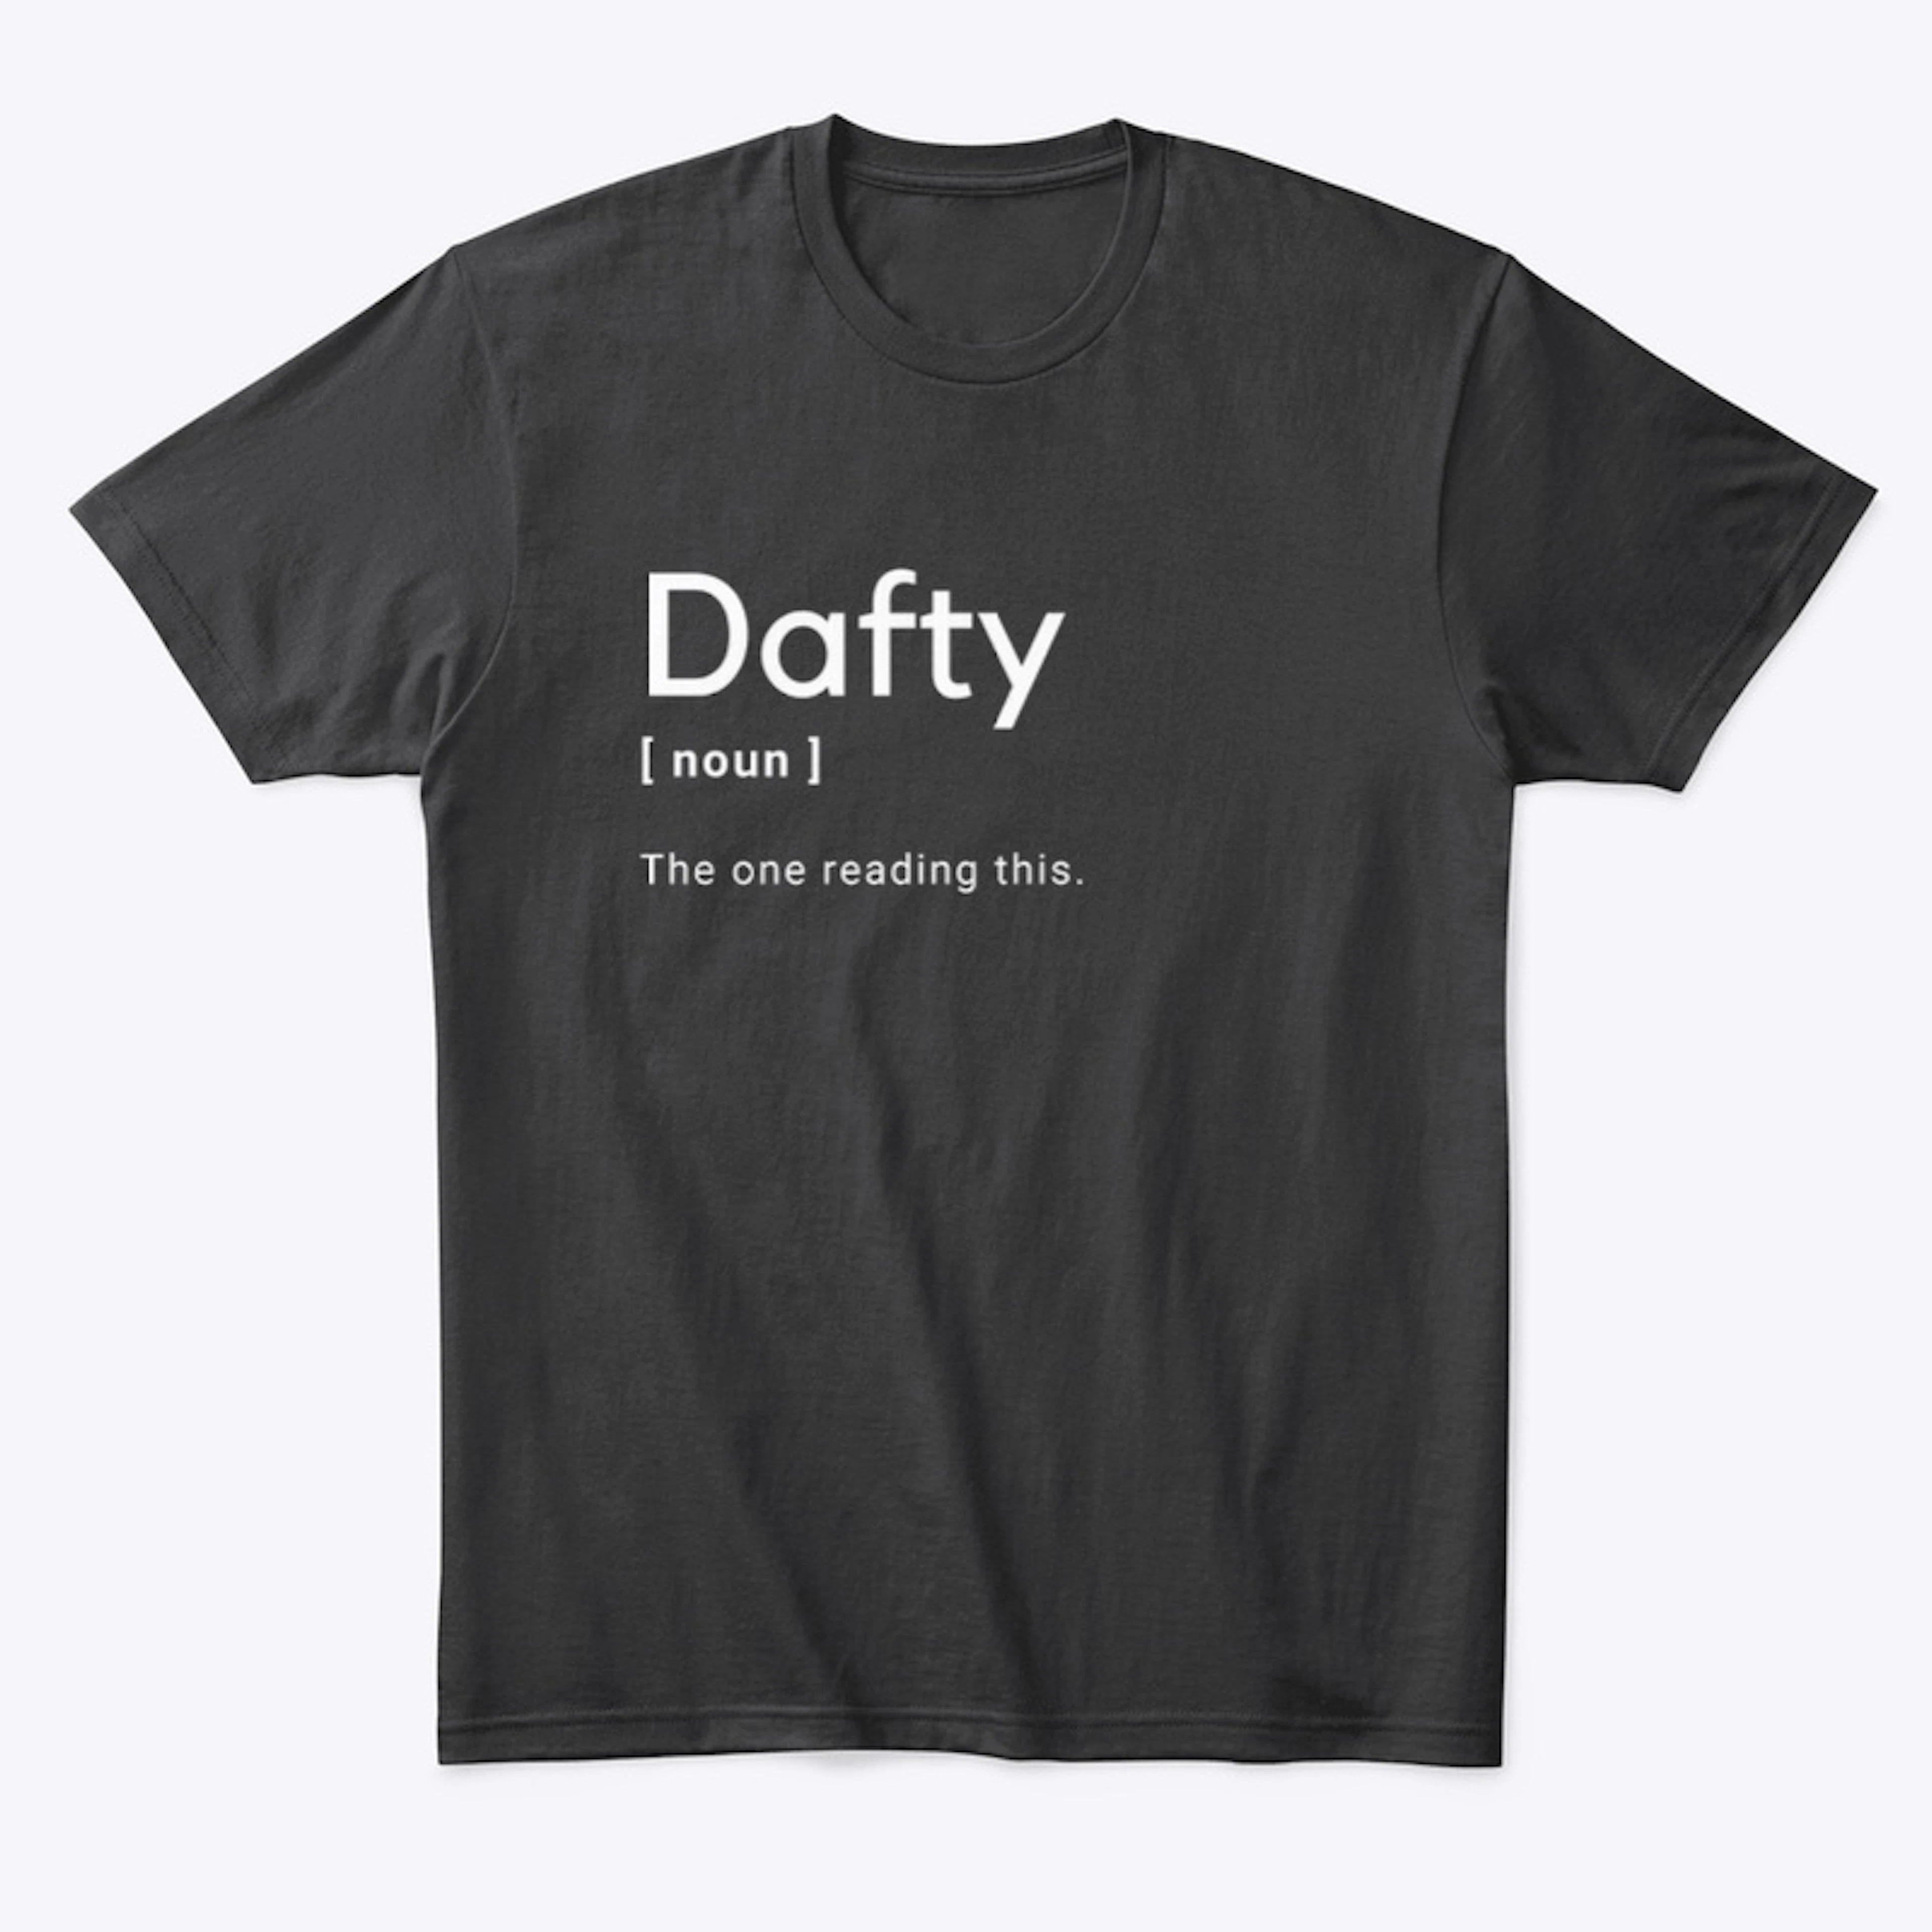 DAFTY meaning